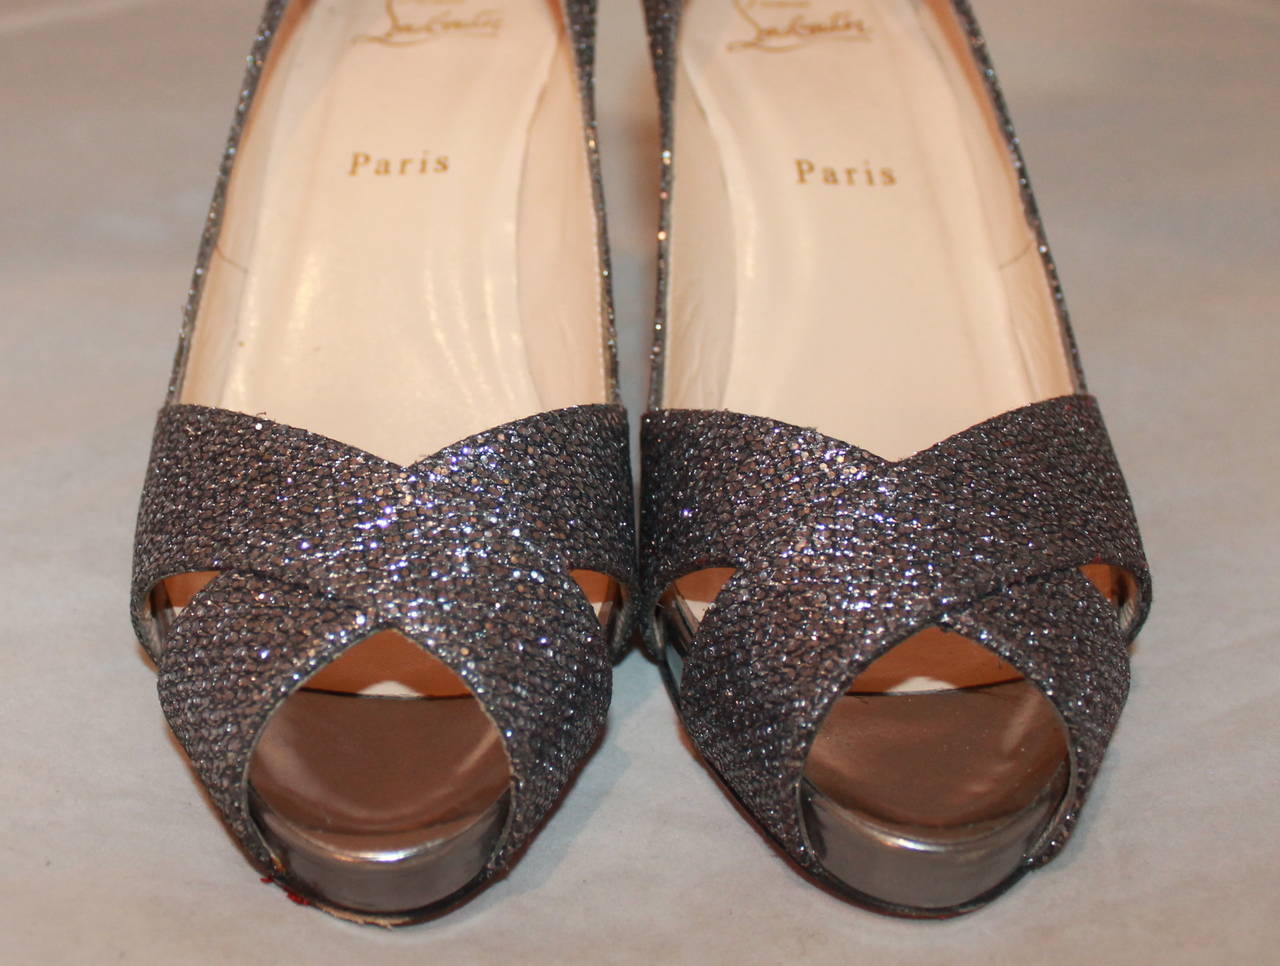 Christian Louboutin Gunmetal Sparkly Heels - 38.5. These shoes are in excellent condition with moderate wear on the bottom.